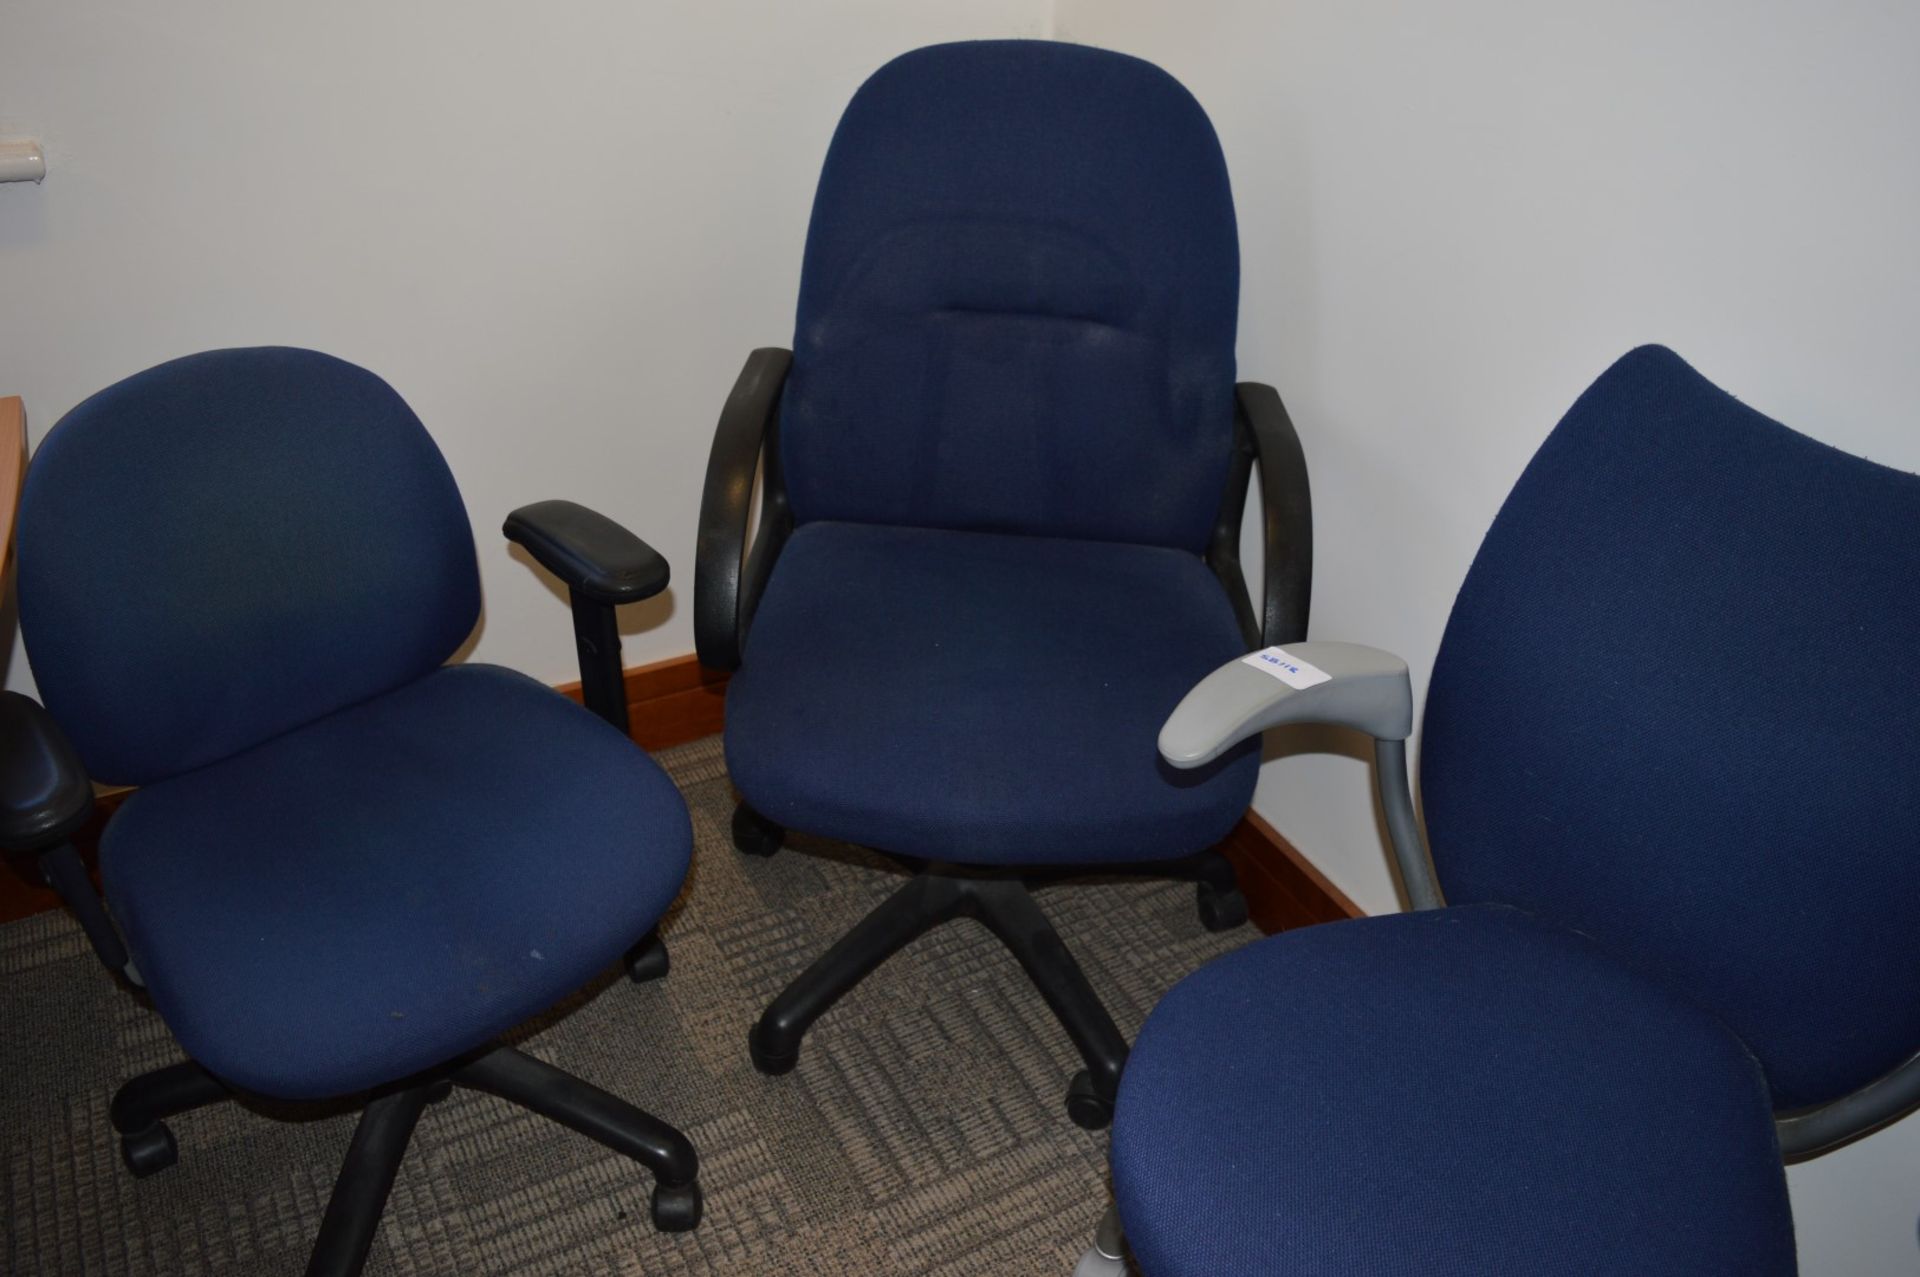 5 x Various Office Chairs - Blue Fabric Swivel Ergonomic Office Chairs - Various Conditions - Ref - Image 3 of 4